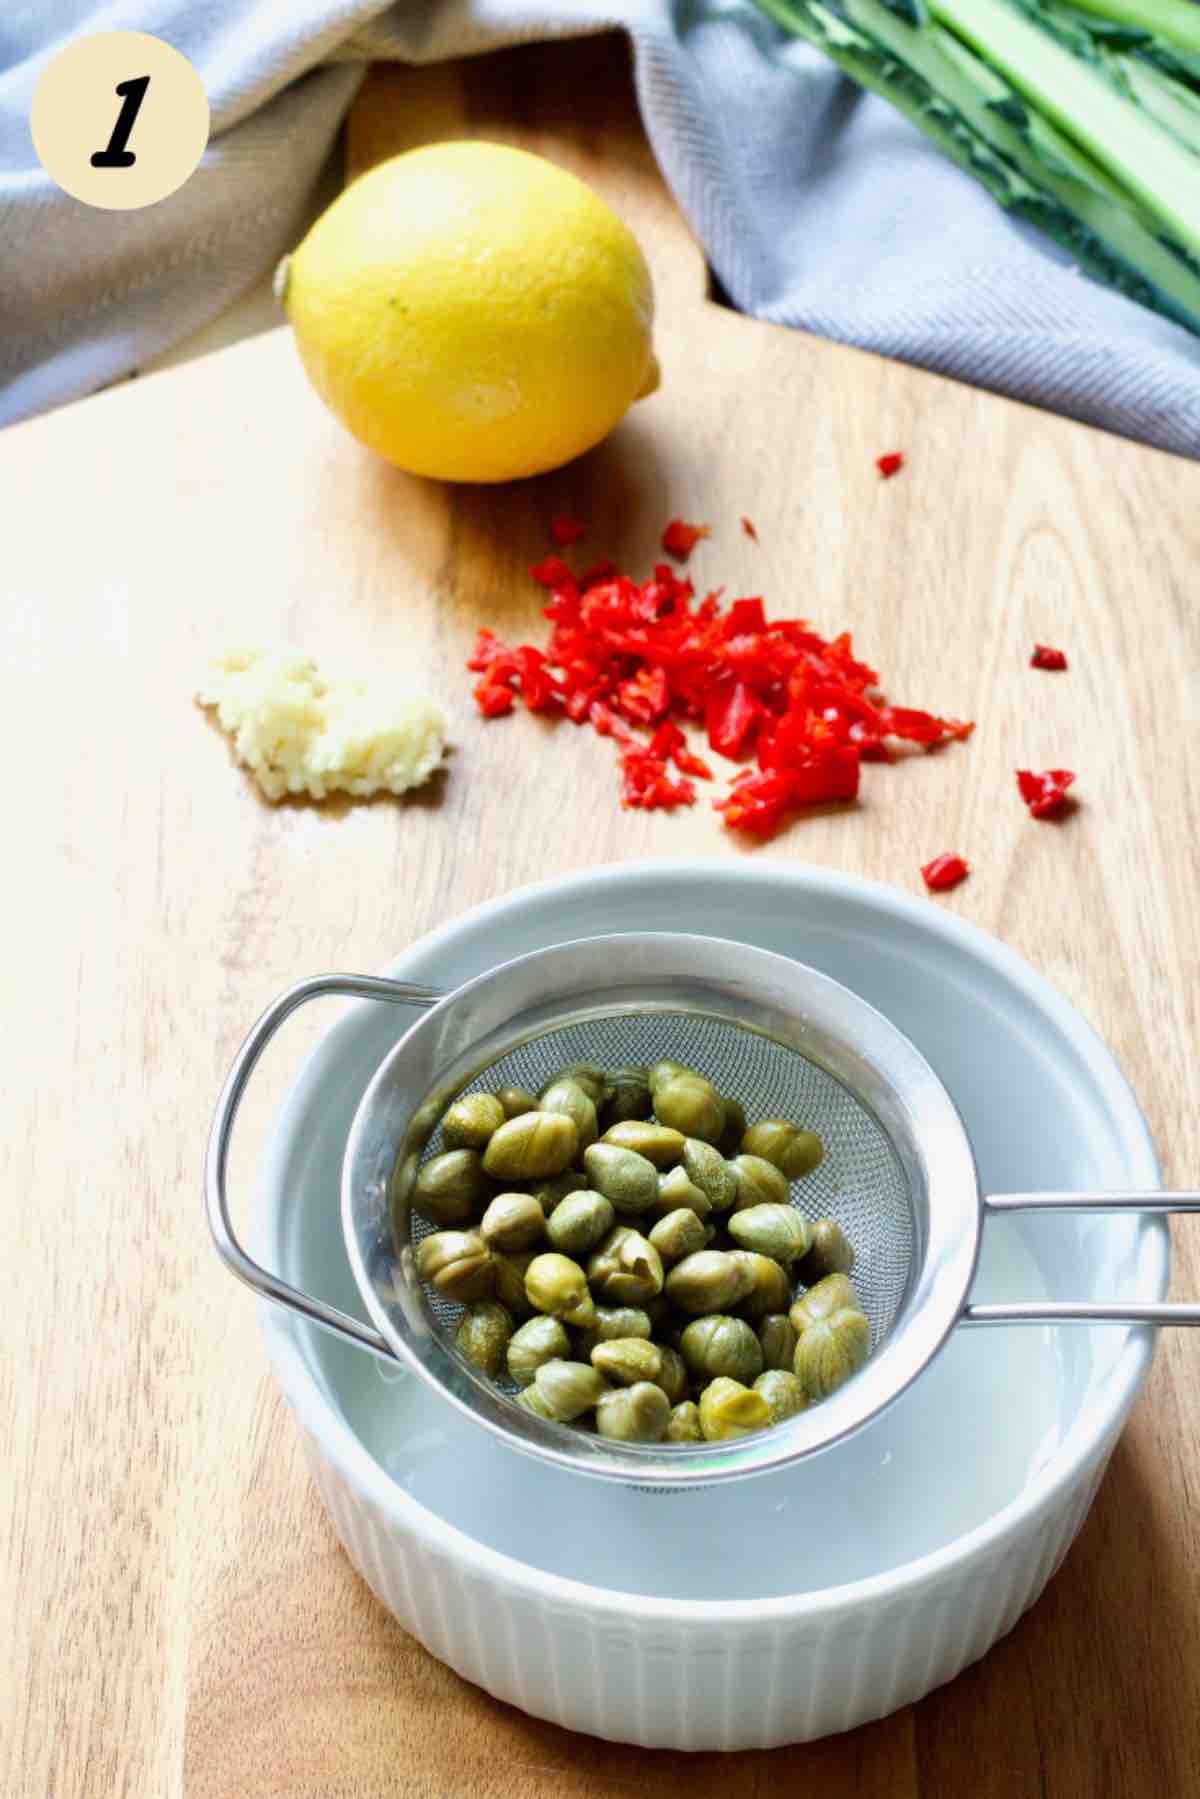 Draining capers in a sieve over a bowl.